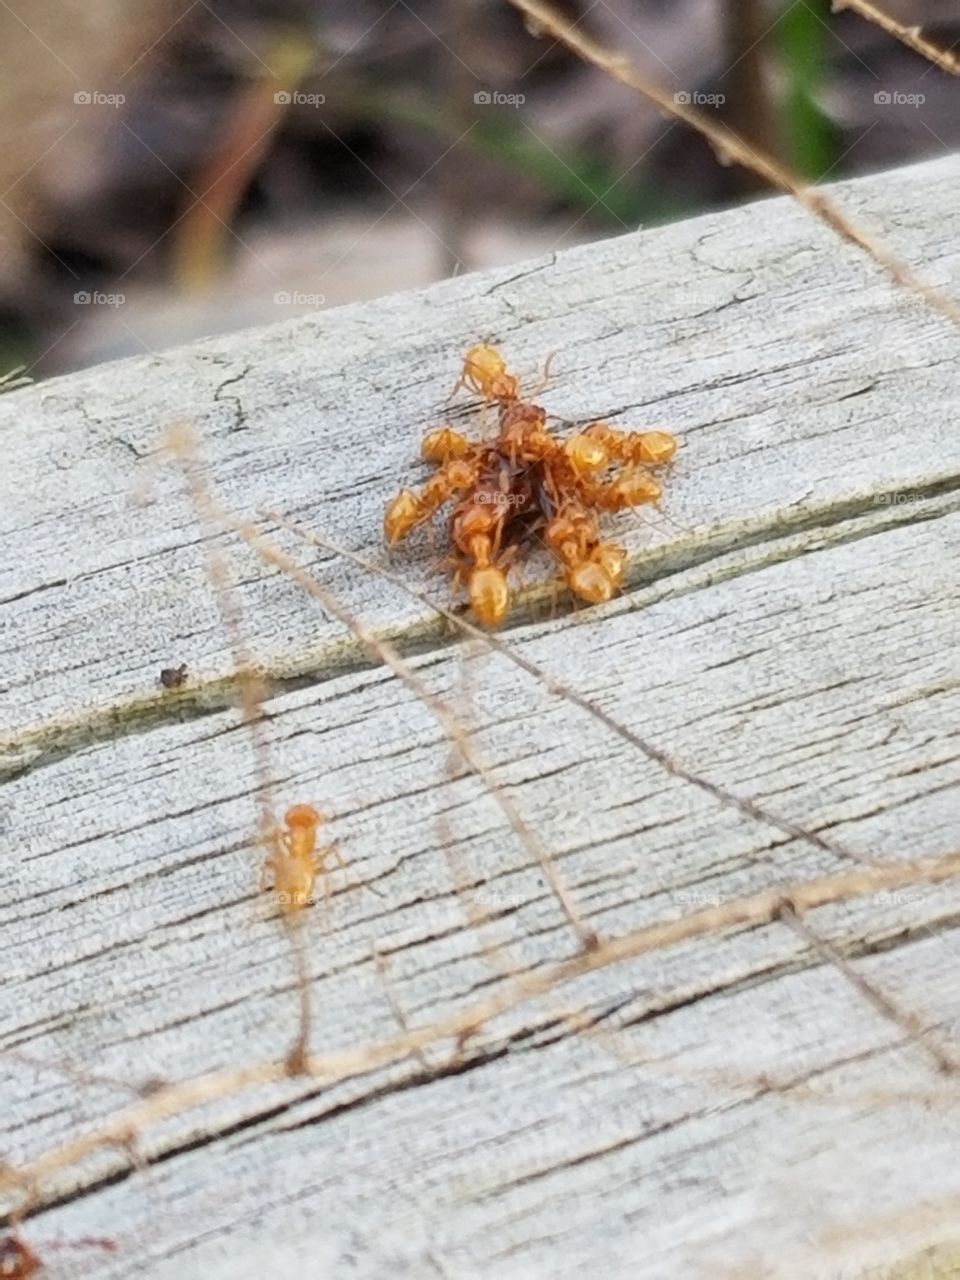 Bright orange ants feasting on a winged black ant.